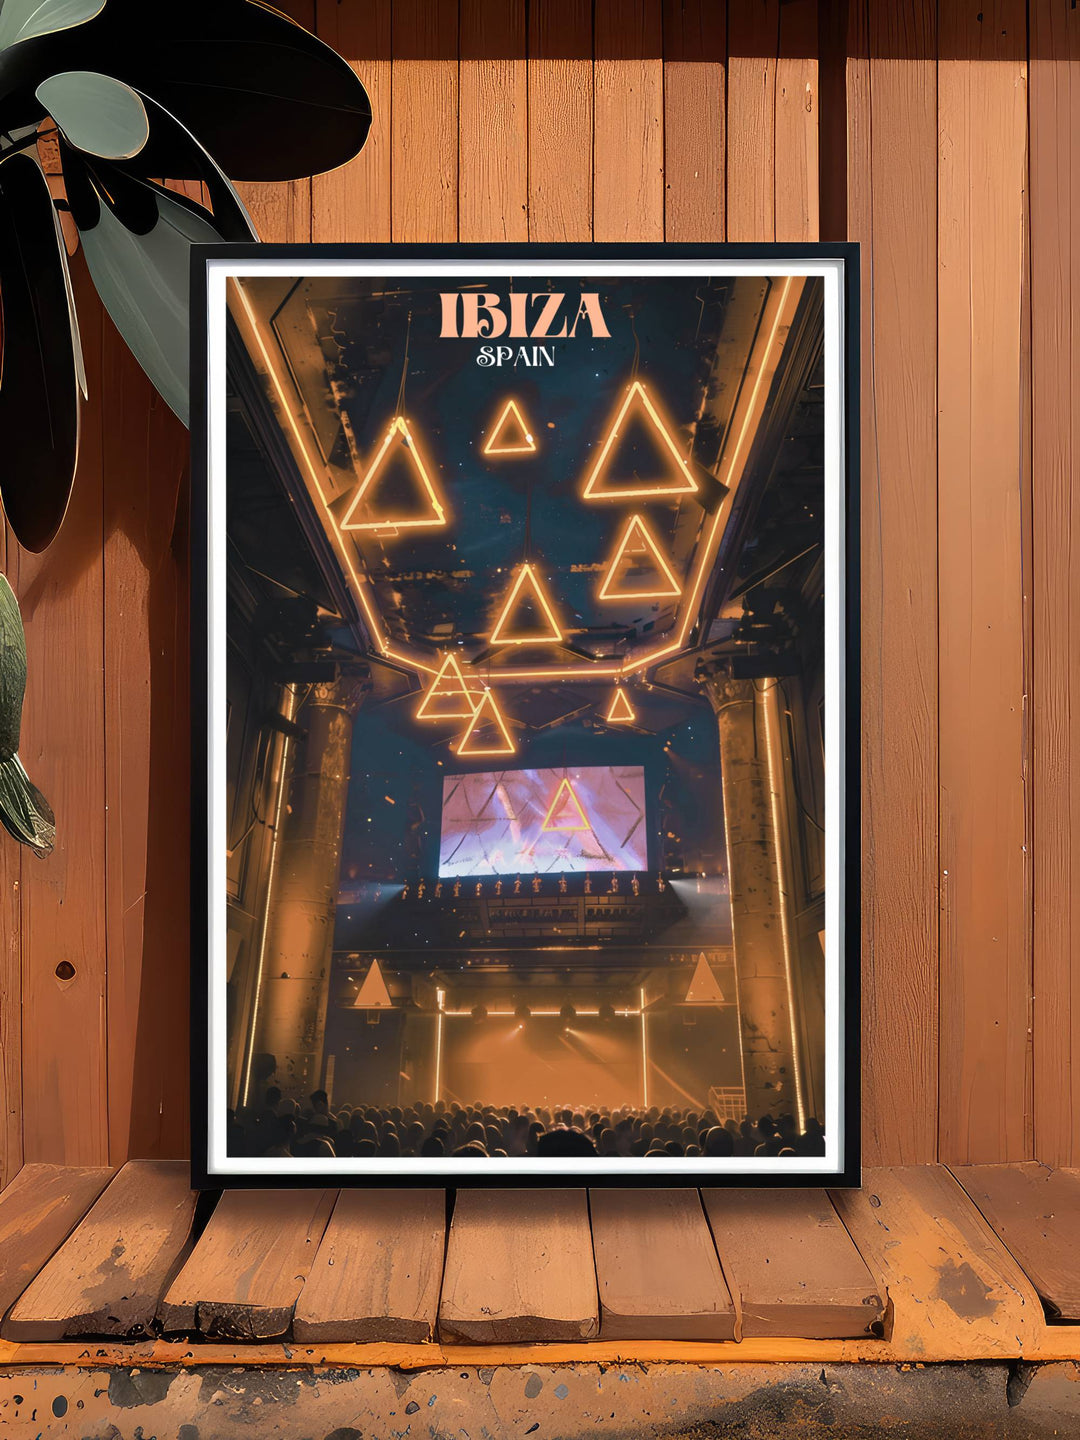 Beautifully designed Ibiza club poster showcasing the famous O Beach Day Club and Amnesia NightClub a perfect addition to any home decor for fans of Ibiza Spain print and dance music art